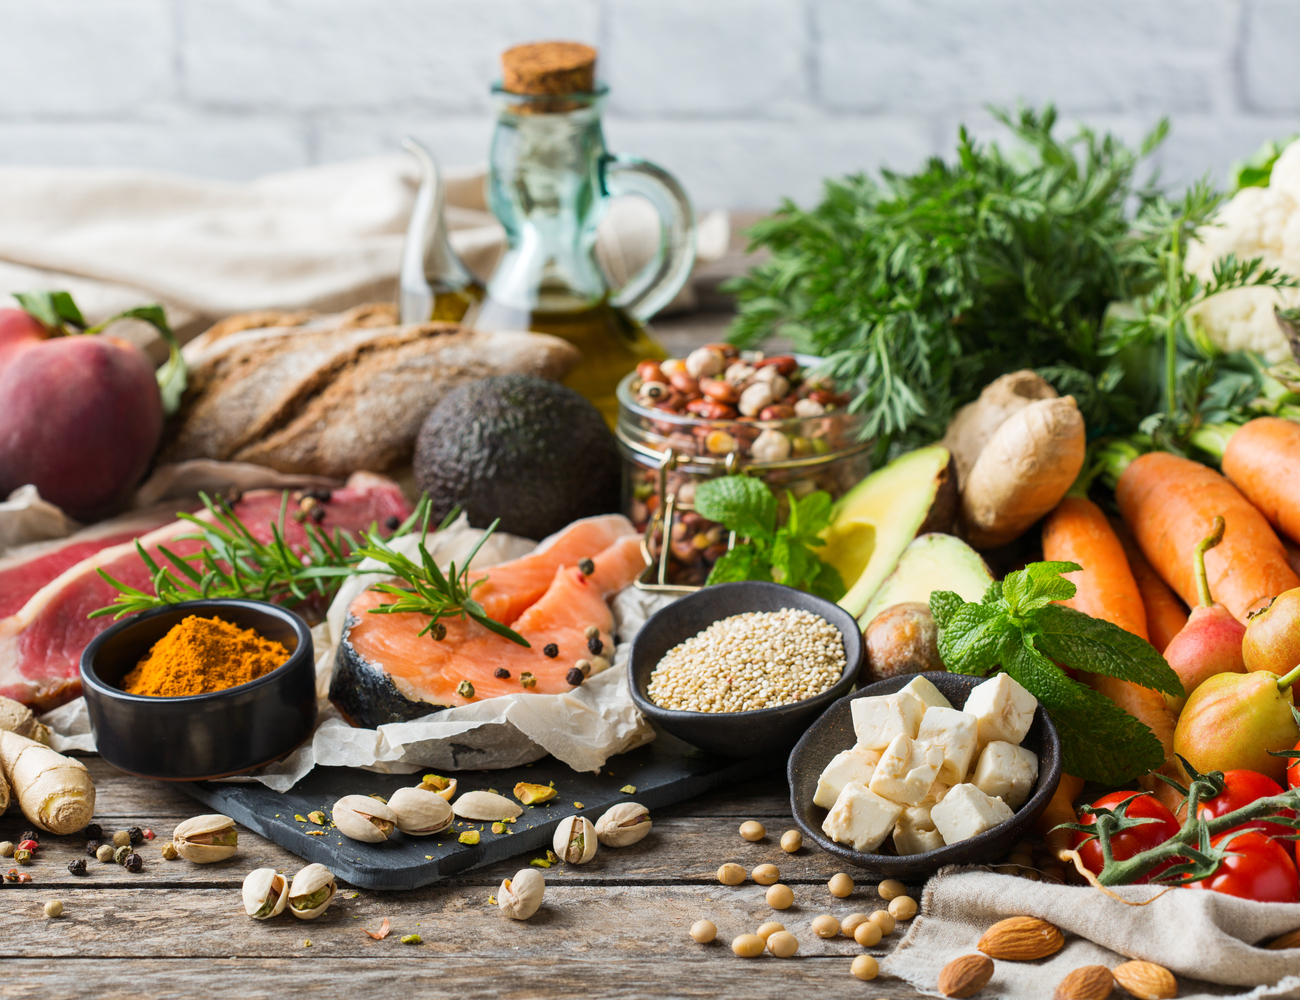 The Best Diet For Immune Health, According to Nutritionists